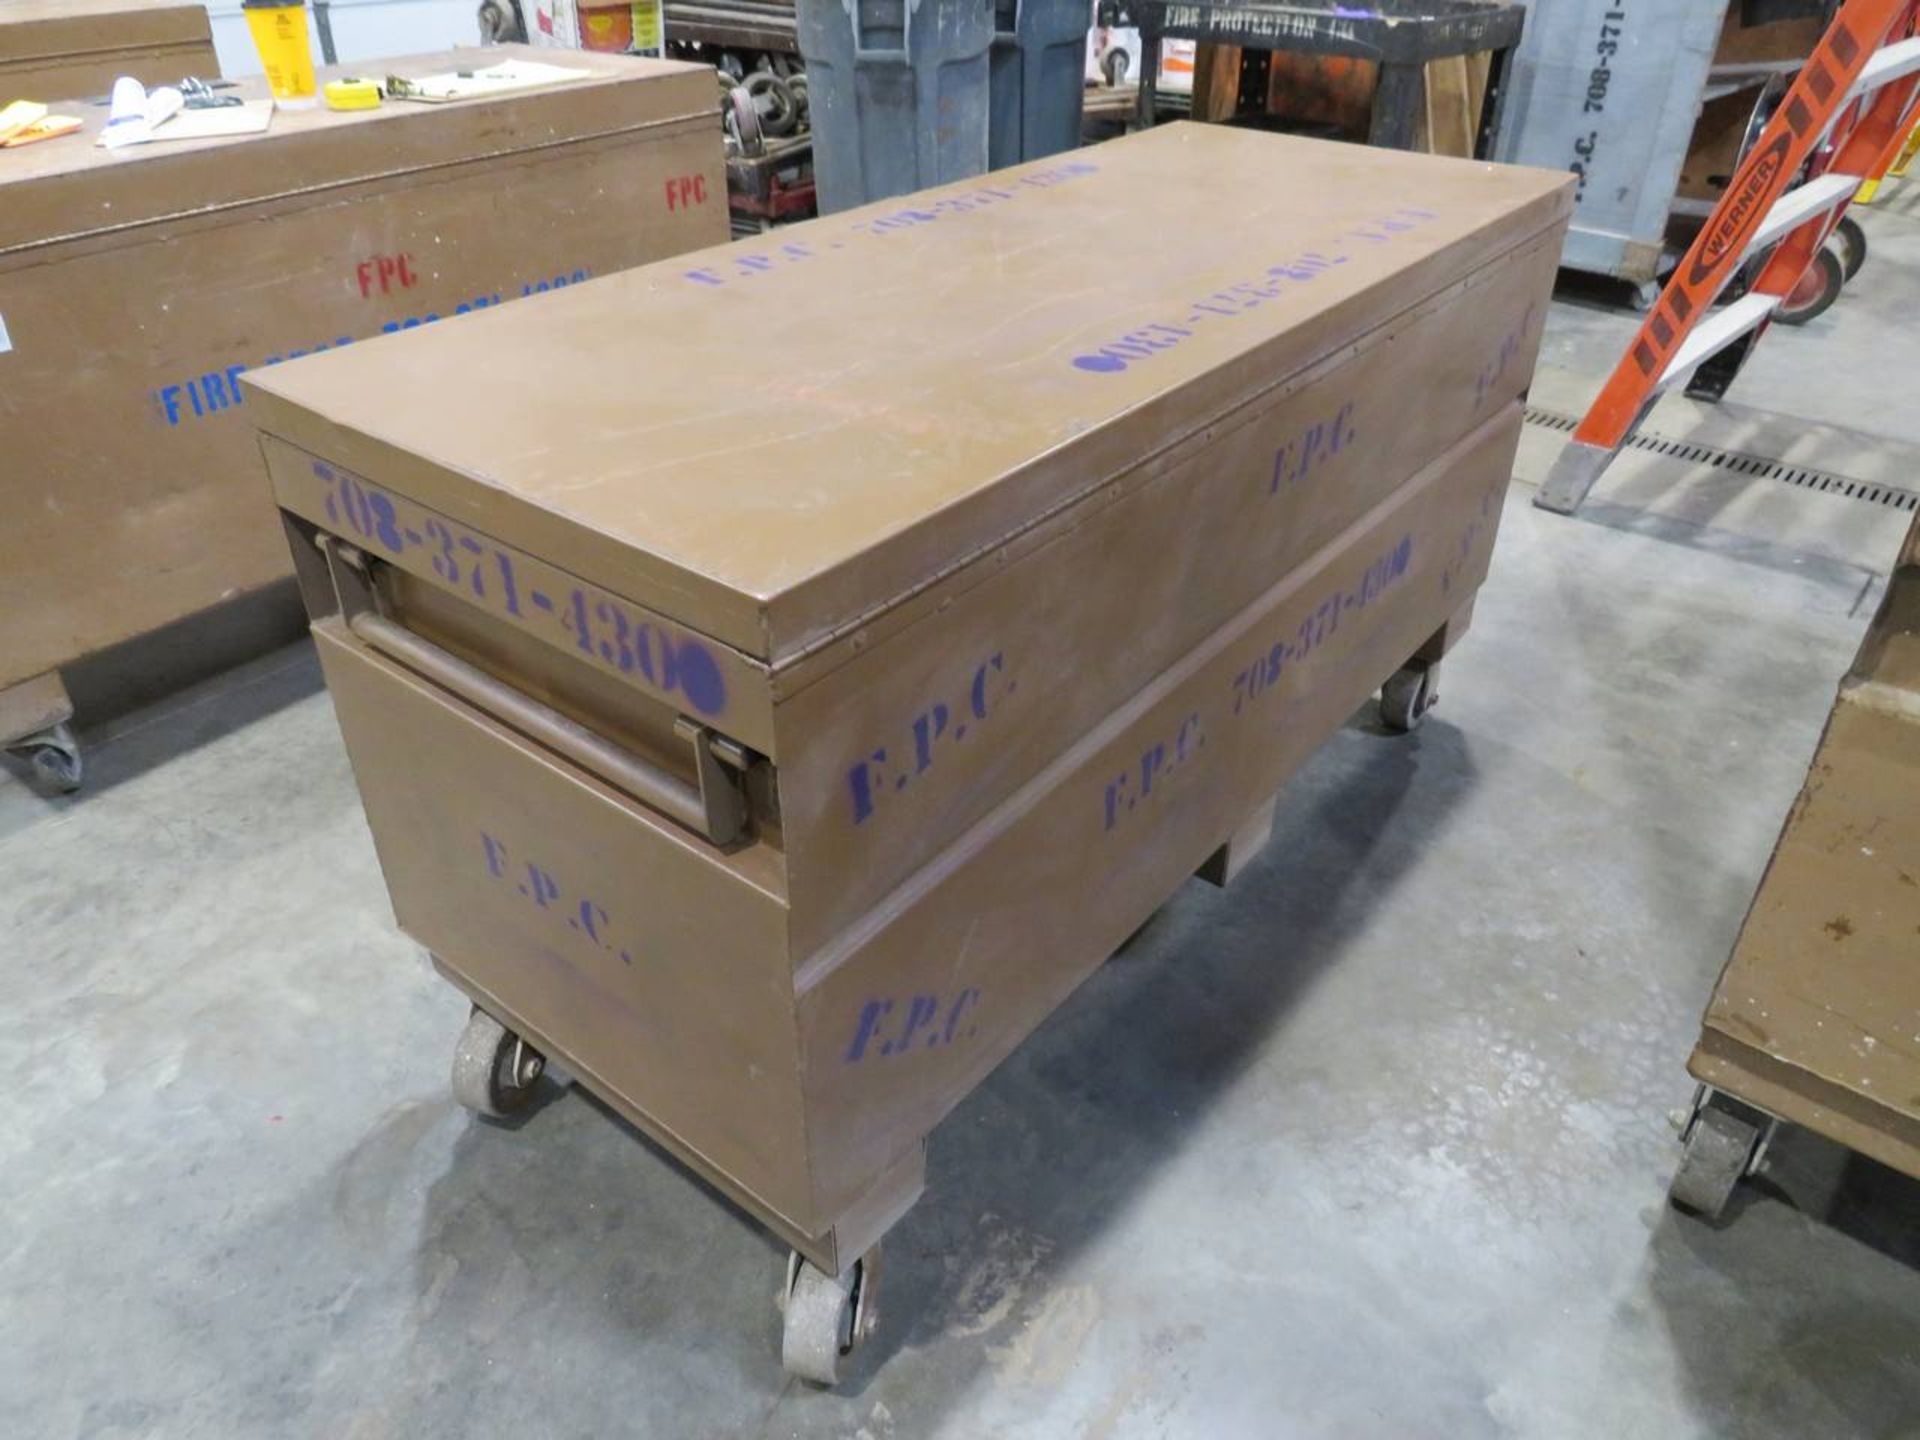 Knaack 20.25 Cu. Ft. - Approx. 60" W x 24" D x 35" H Storage Chest - Image 3 of 7